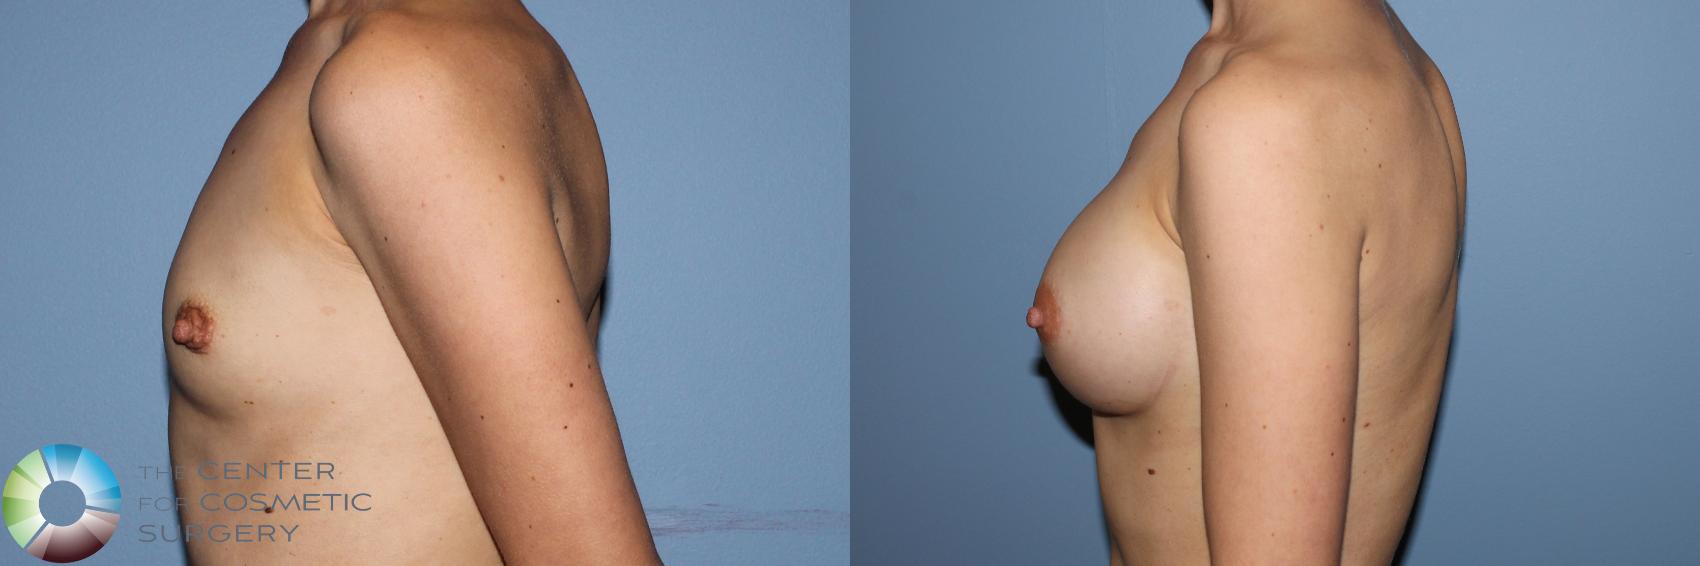 Before & After Breast Augmentation Case 11703 Left Side View in Golden, CO